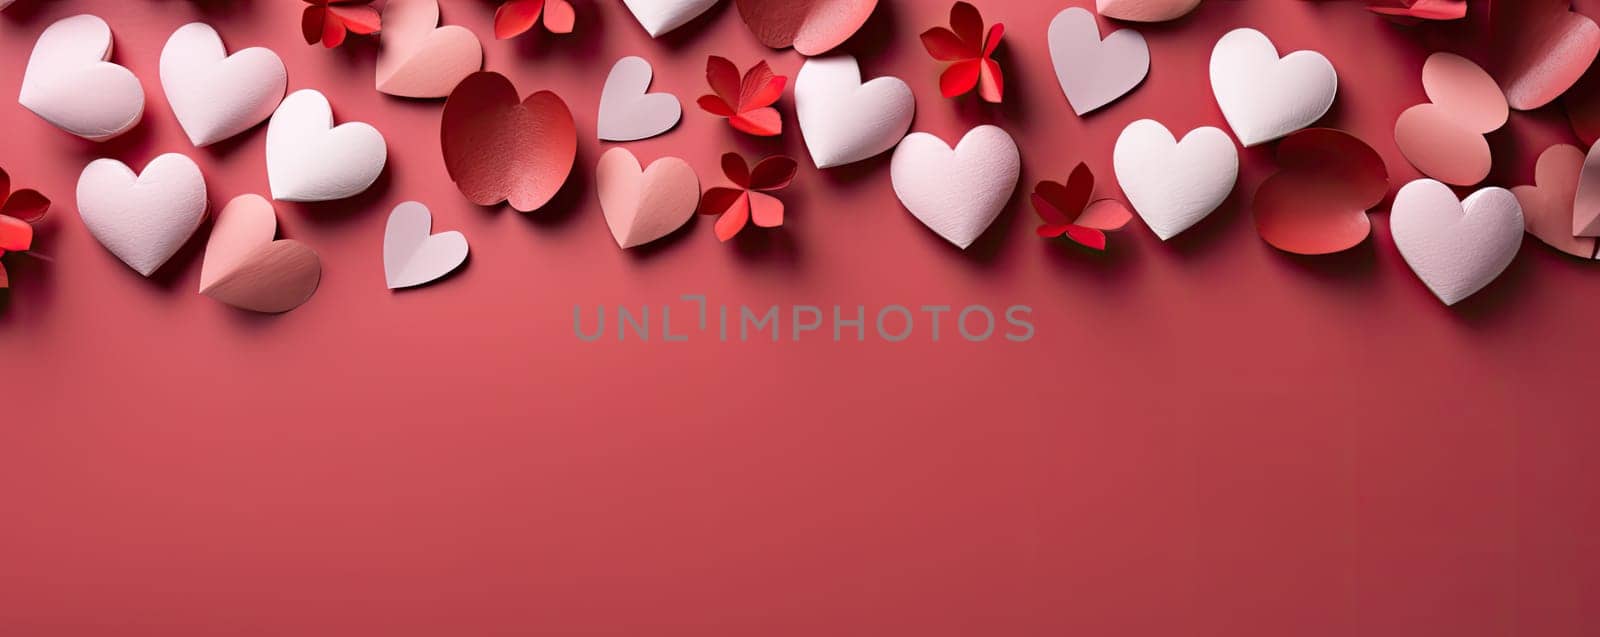 Pink hearts on a bright pink background, a symbol of love and romance